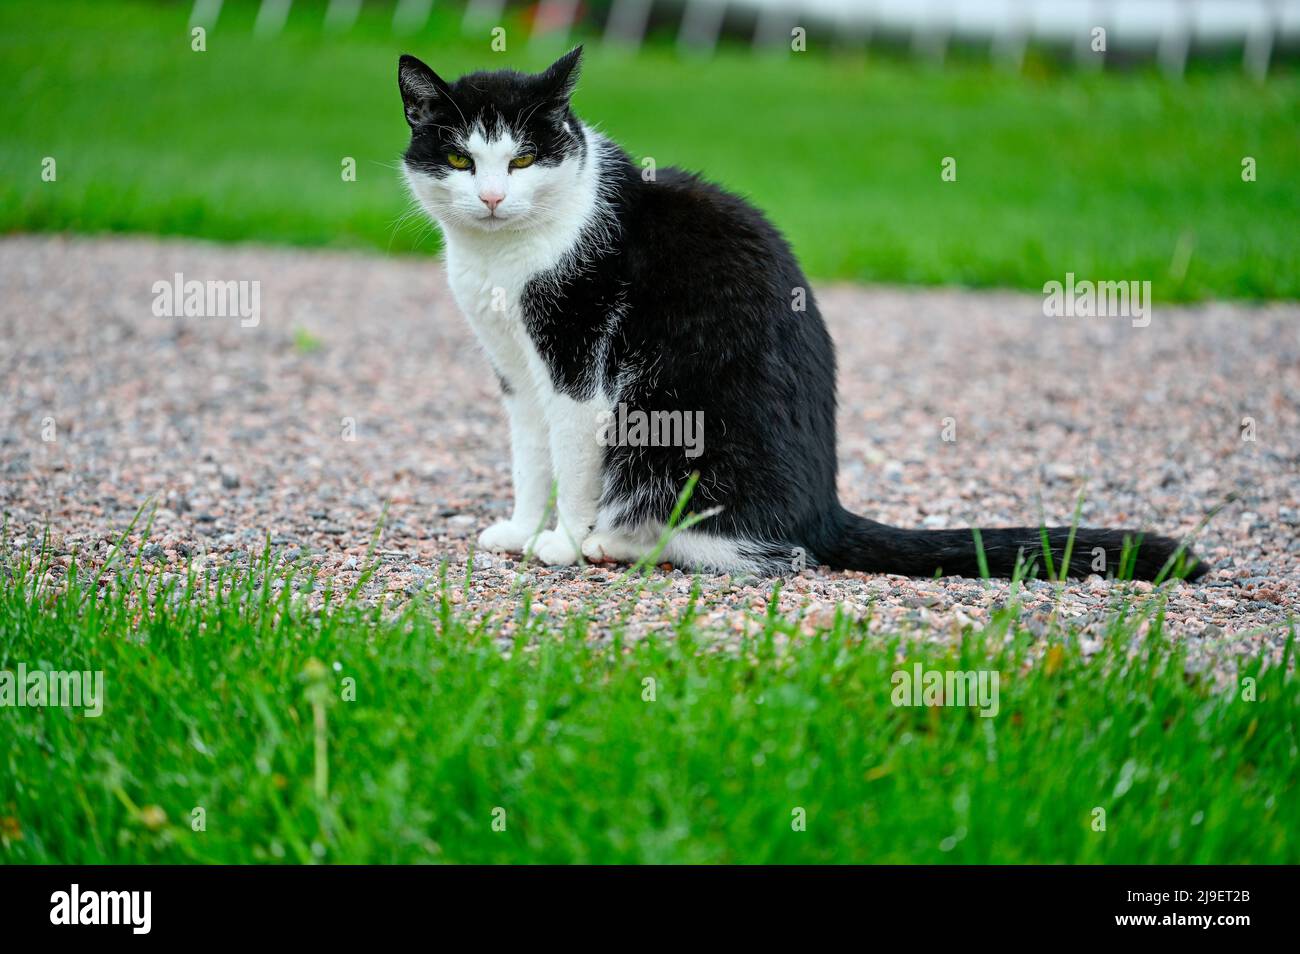 black and white domestic cat sitting in garden Stock Photo